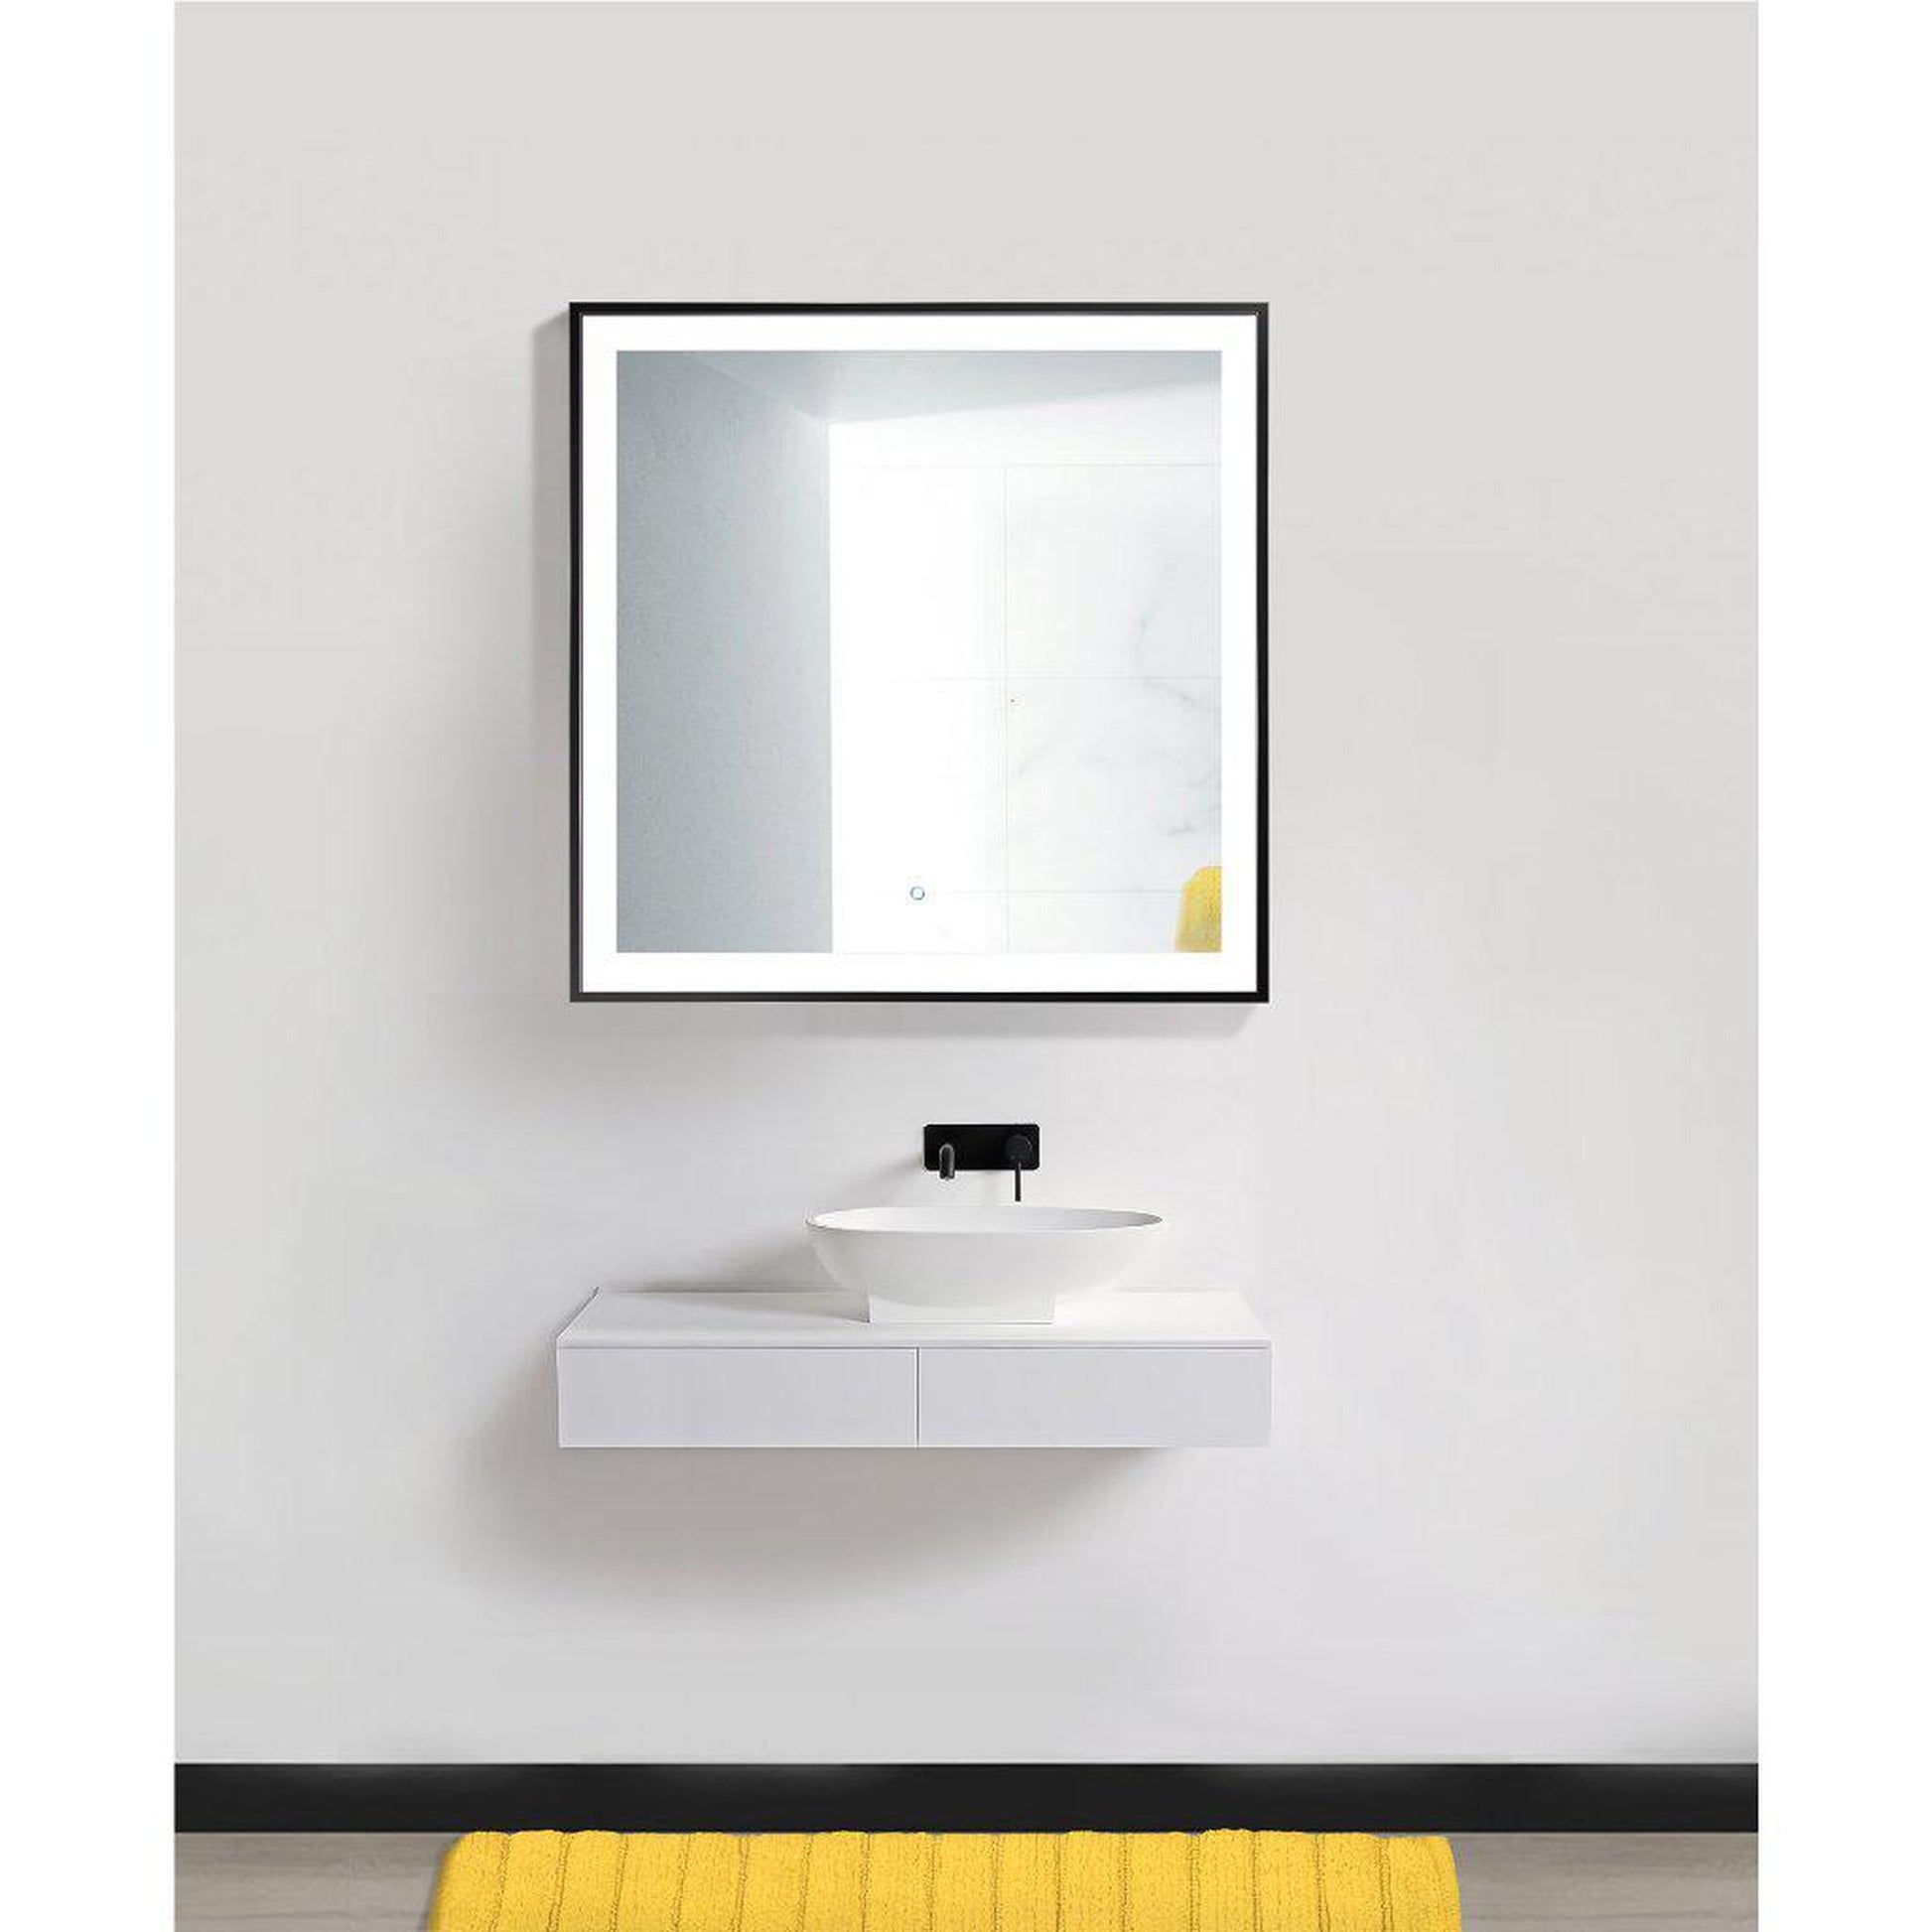 Krugg Reflections Soho 36" x 36" 5000K Square Matte Black Wall-Mounted Framed LED Bathroom Vanity Mirror With Built-in Defogger and Dimmer